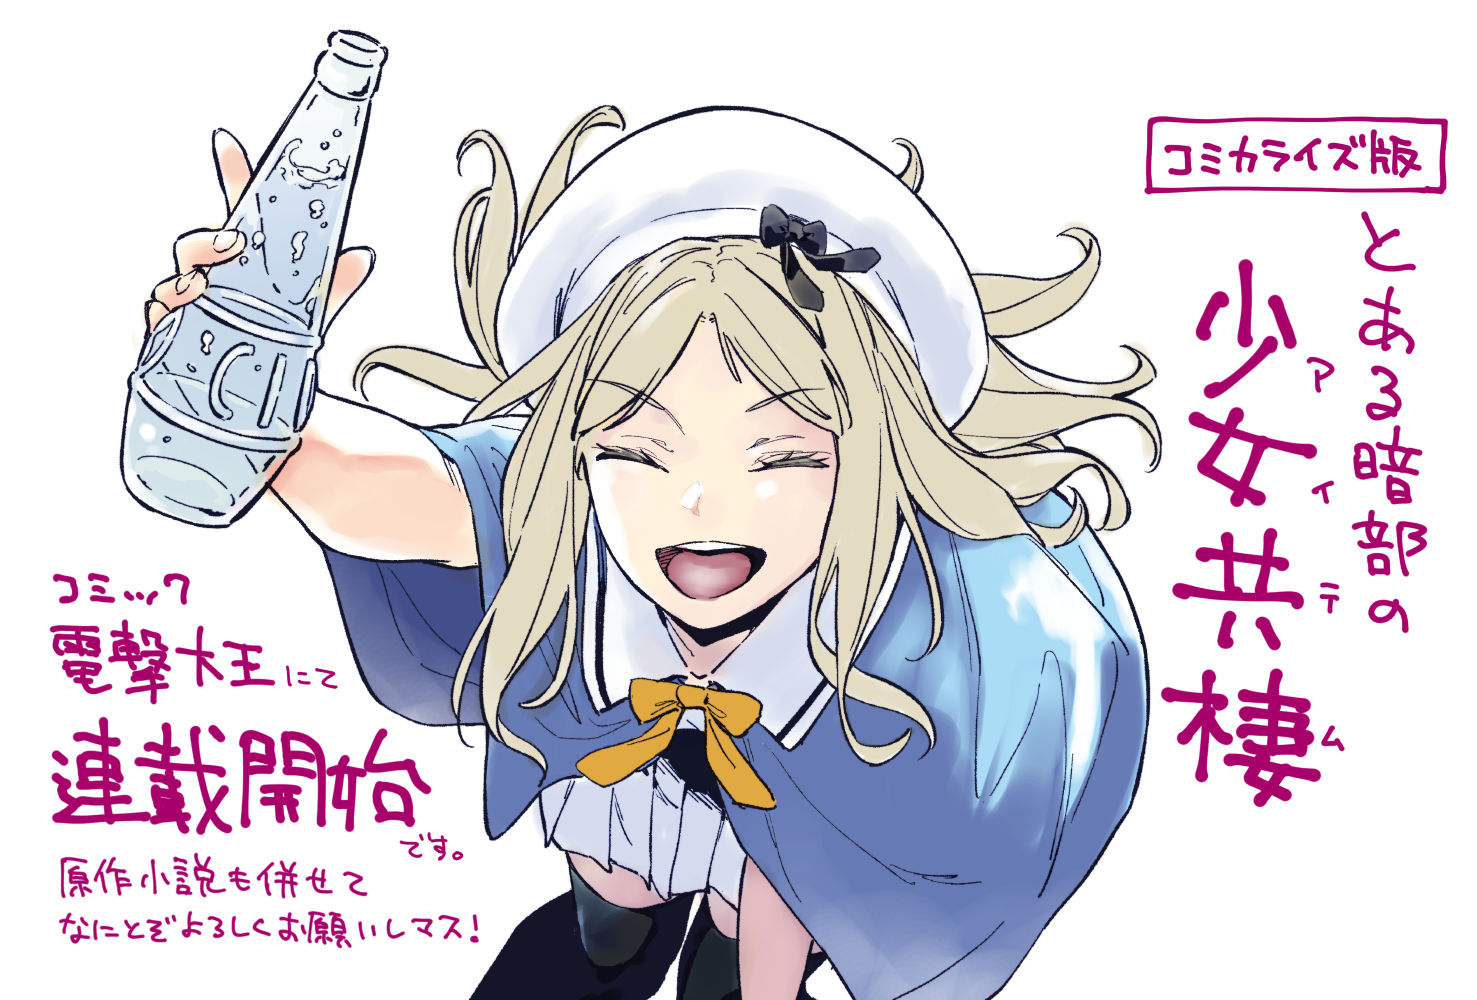 A Certain Magical Index Spinoff ‘Toaru Anbu no Item’ Manga Chapter 1 Launches in Japan; Free Preview Available